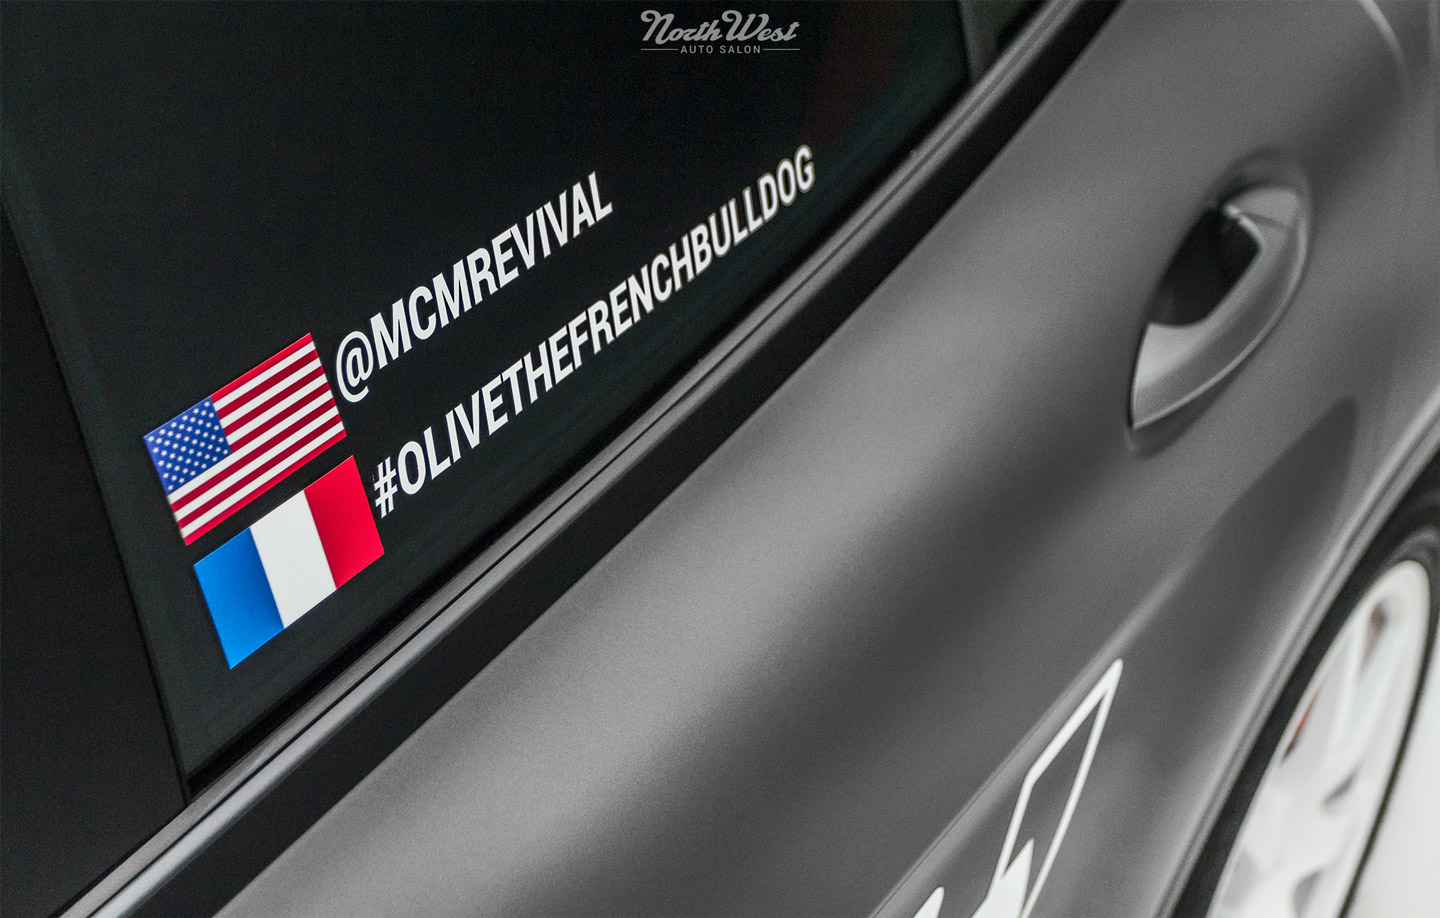 NWAS-GLA-45-AMG-rally-photostudio-mcmrevival-olive-frenchie-s